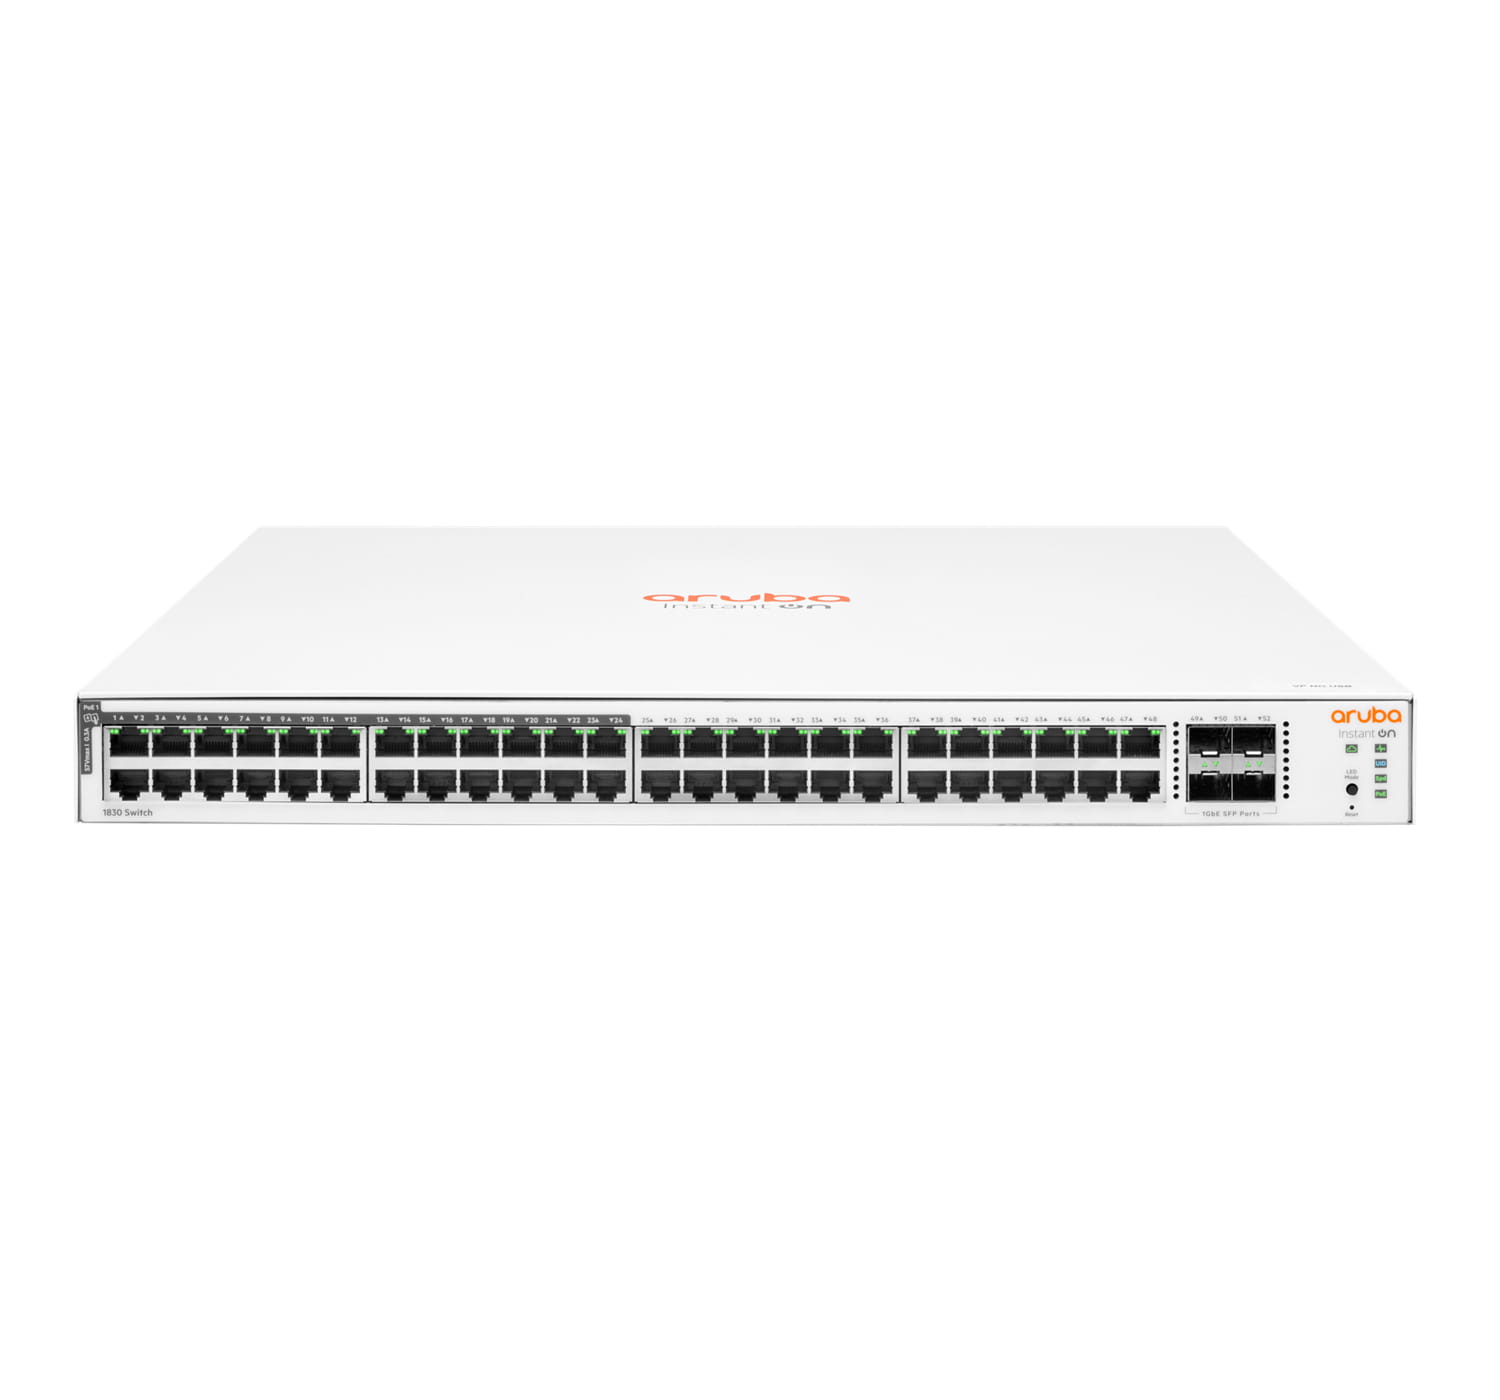 HPE Networking Instant On 1830 48G 24p Class4 PoE 4SFP 370W Switch - Switch - Smart - 24 x 10/100/1000 + 24 x 10/100/1000 (PoE+) - managed